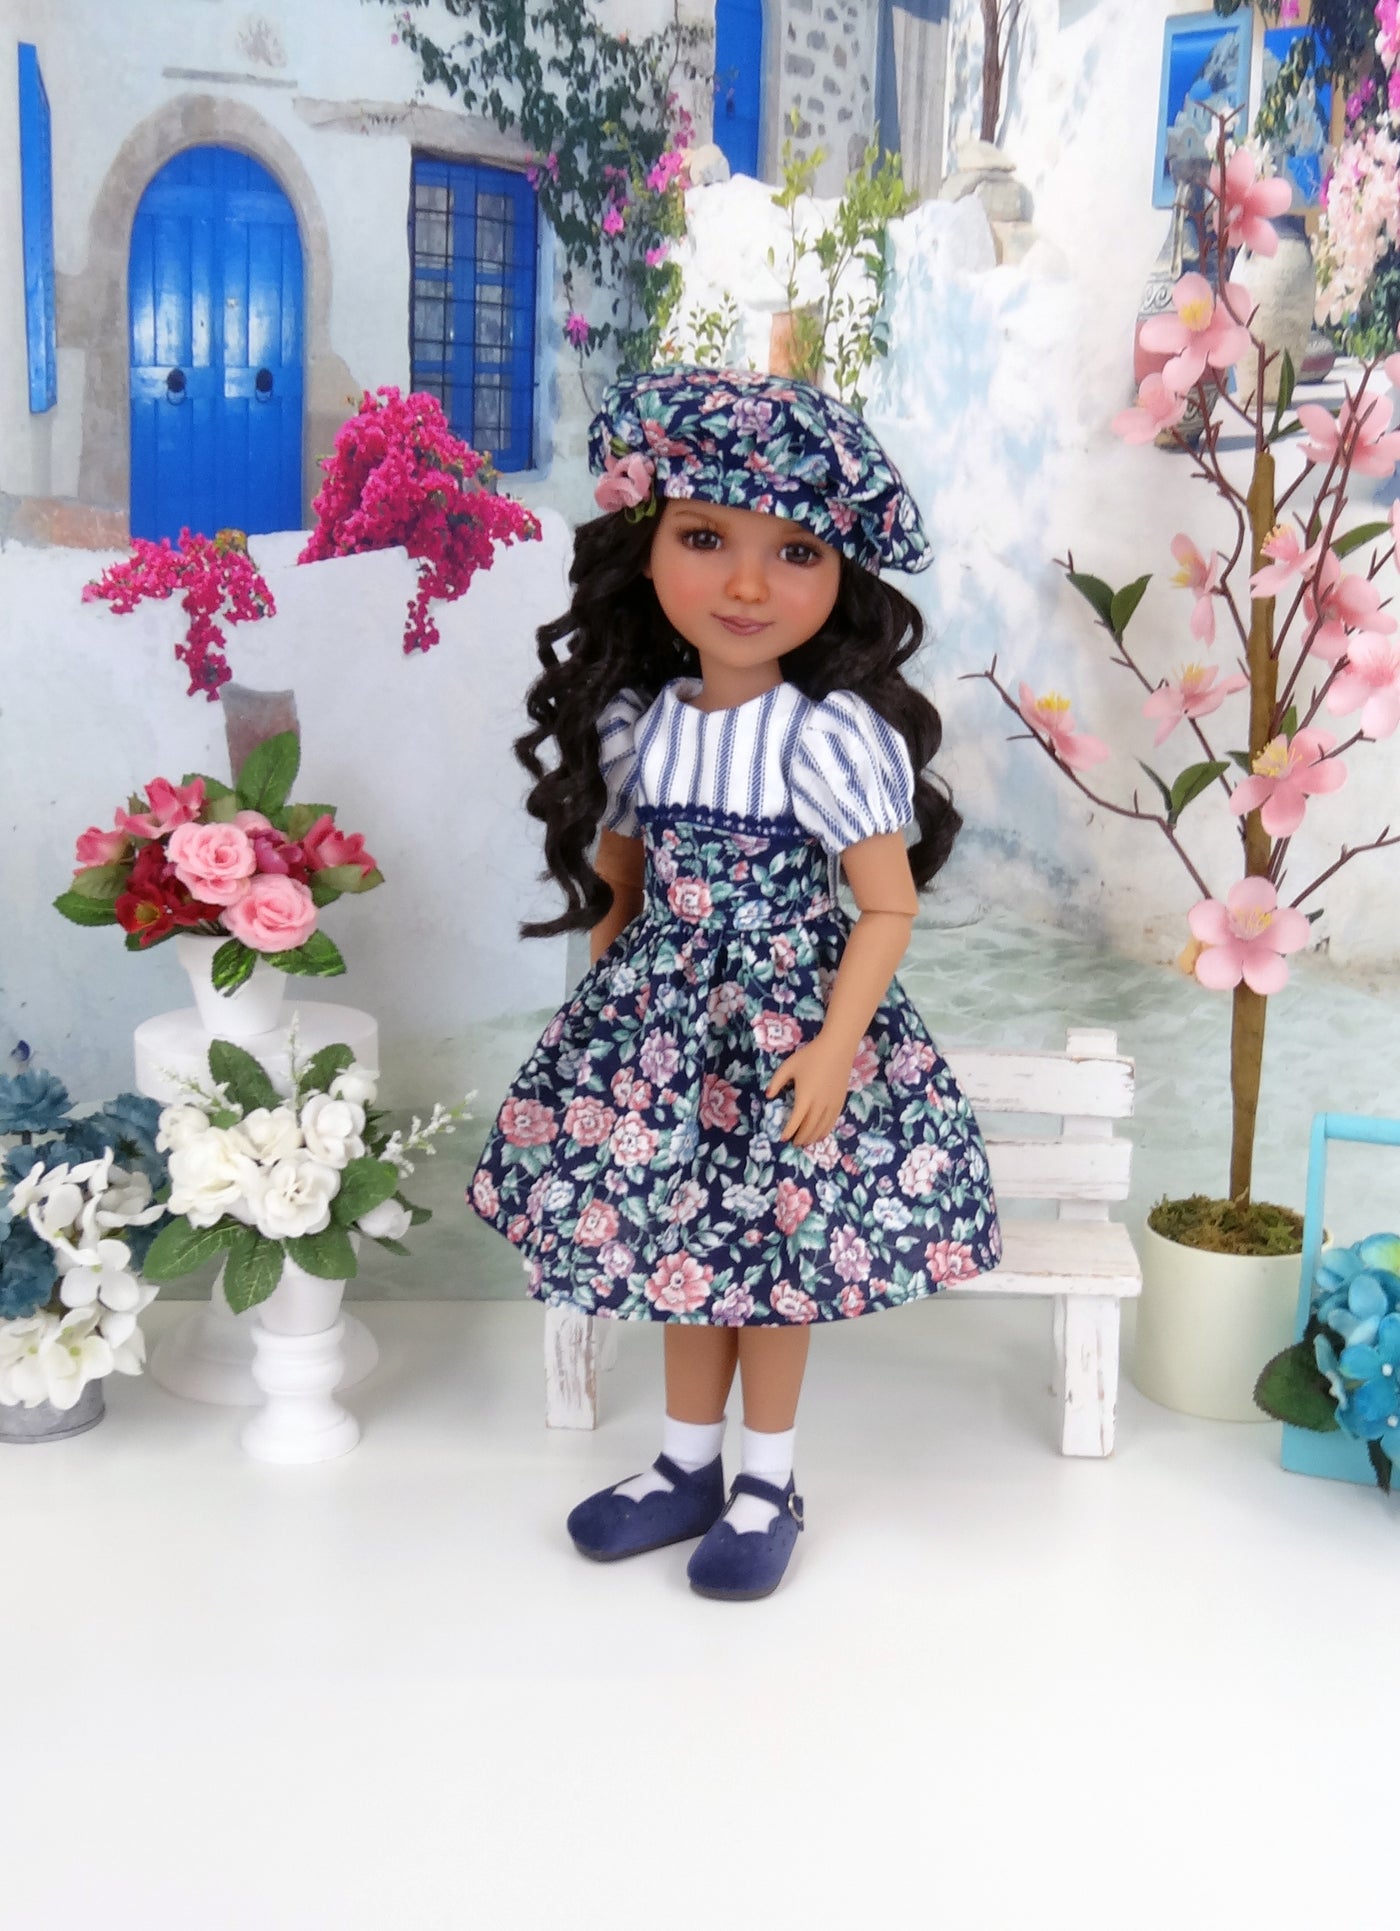 Botanical Beauty - dress and shoes for Ruby Red Fashion Friends doll